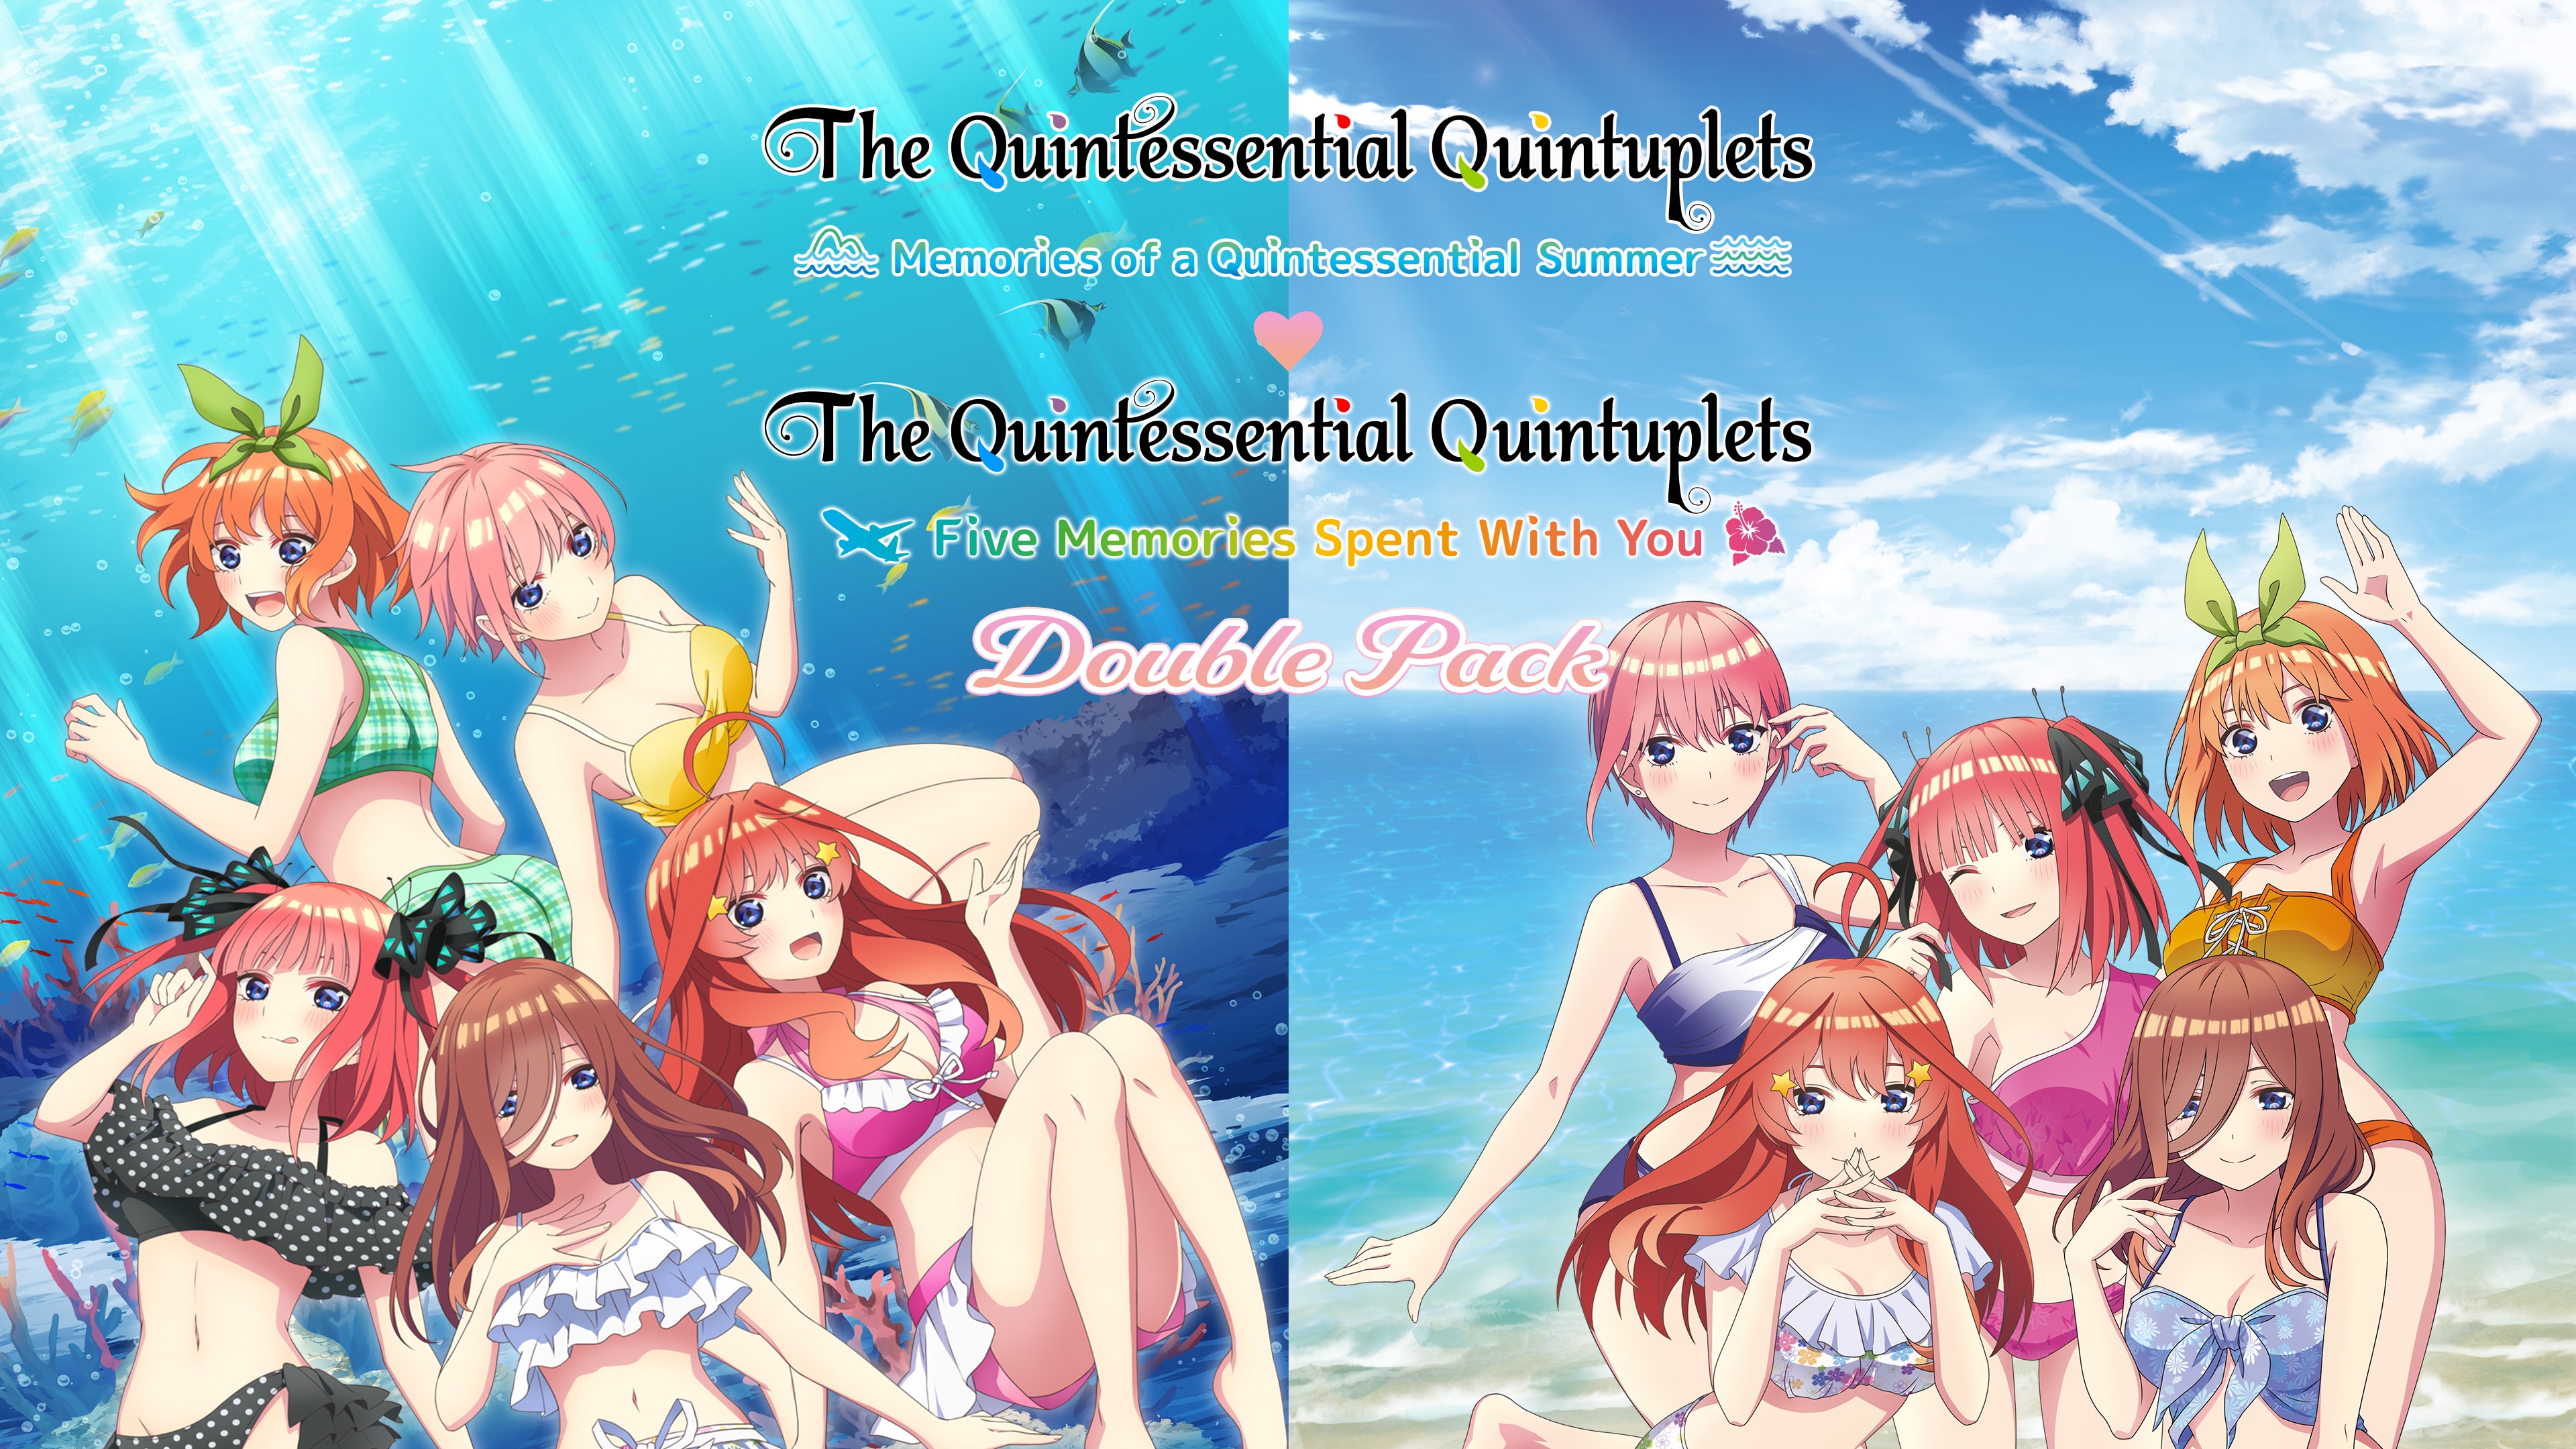 The Quintessential Quintuplets Double Pack